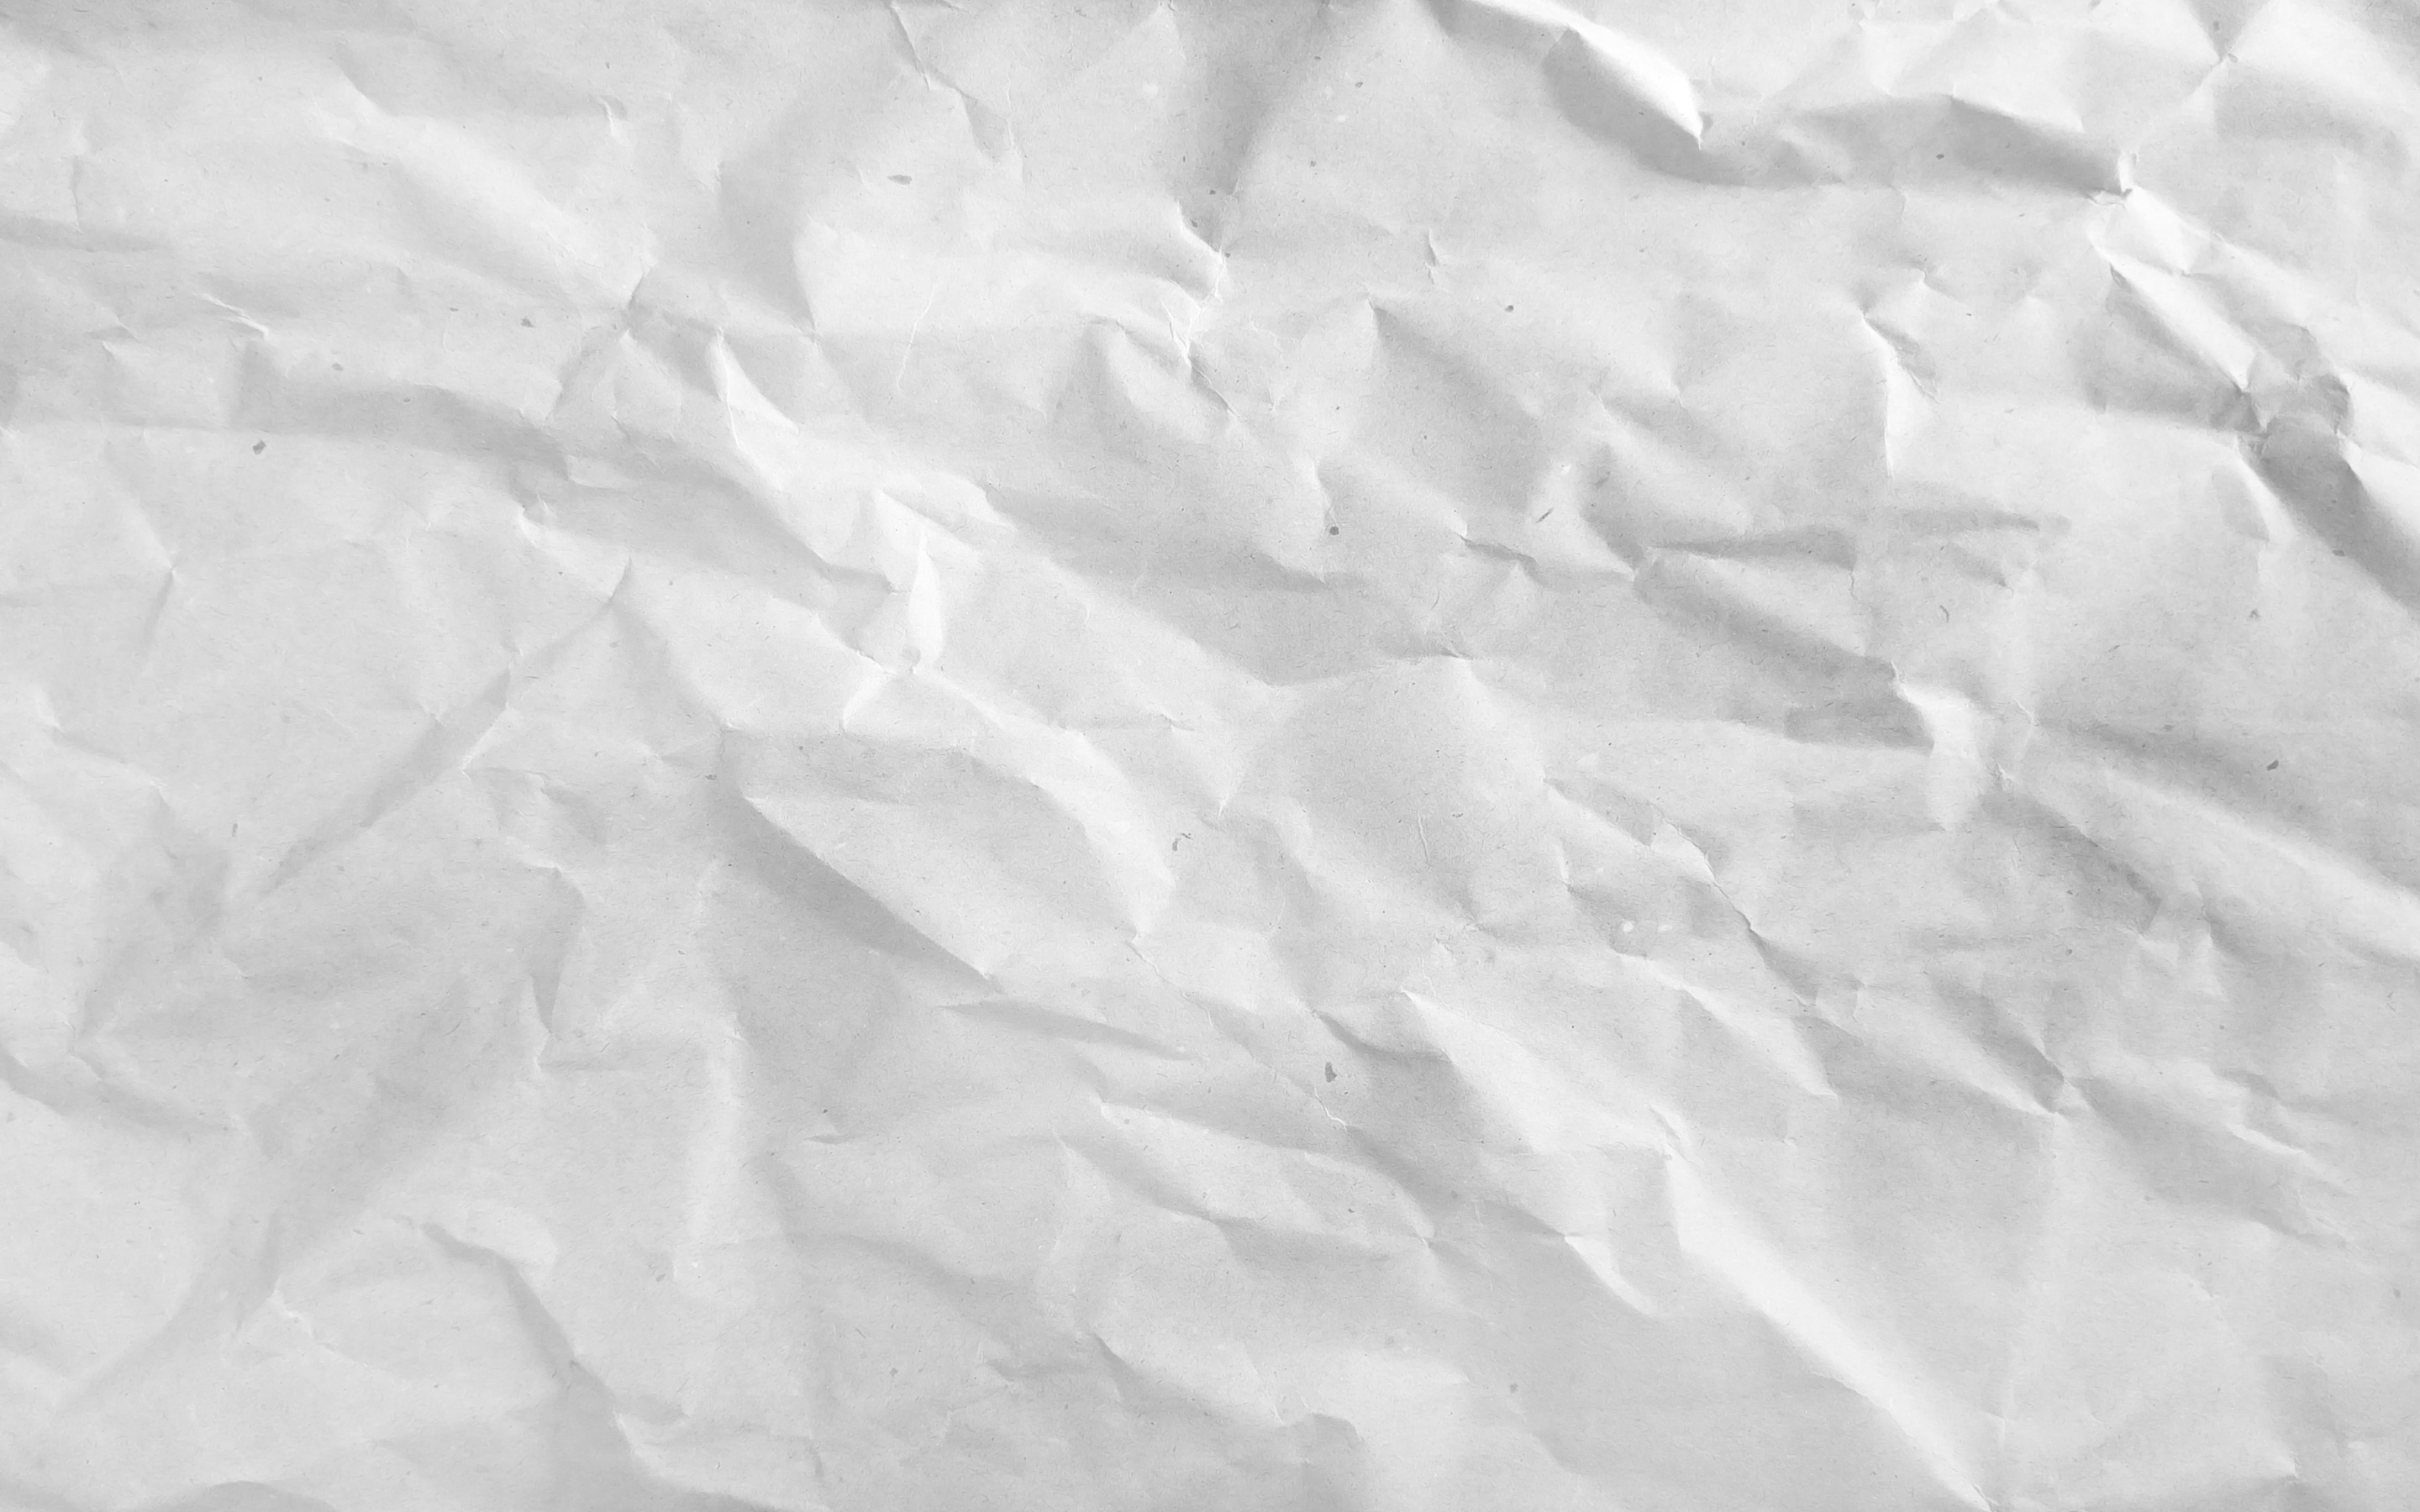 Download wallpaper crumpled paper texture, white crumpled paper background, paper texture, white paper, crumpled paper for desktop with resolution 2880x1800. High Quality HD picture wallpaper